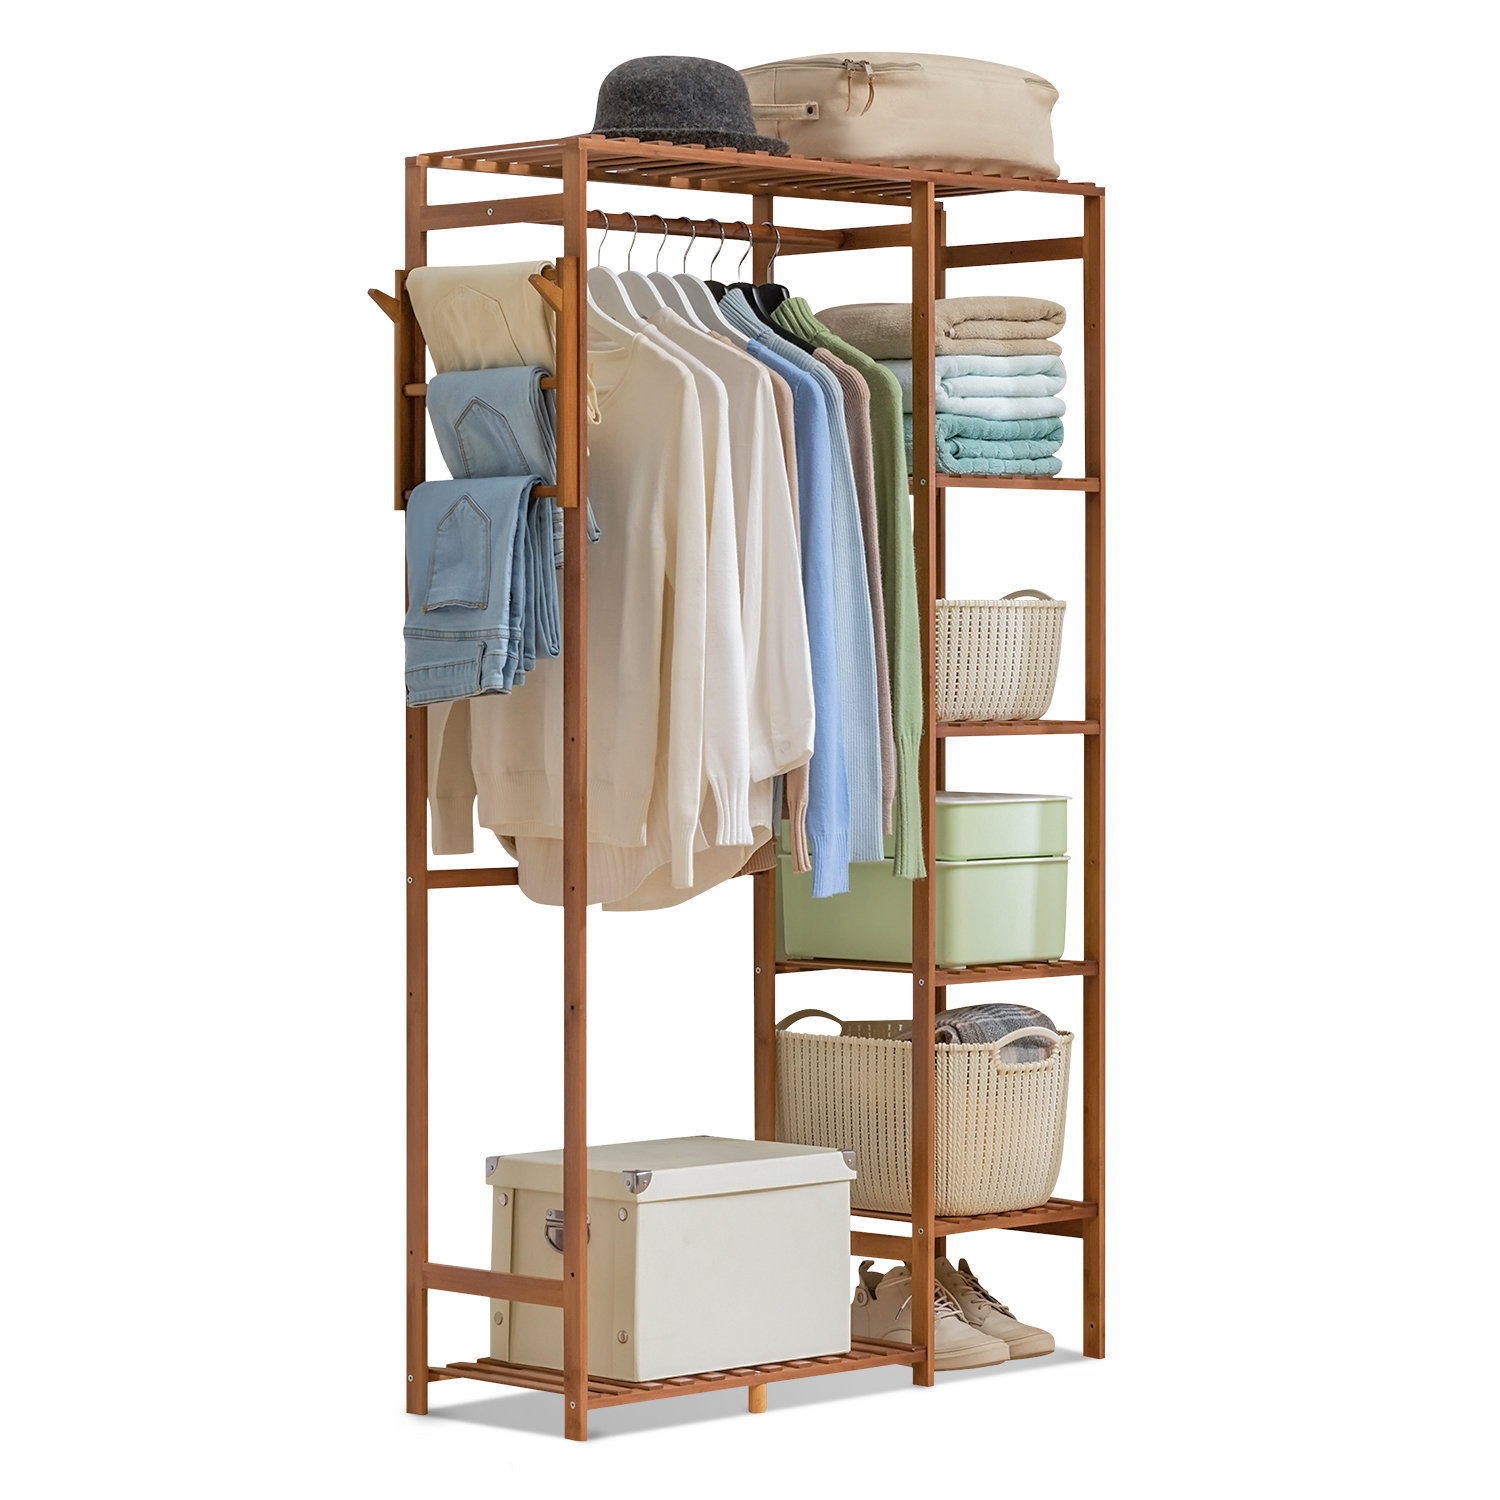 Colorful Wooden Cloth Hangers On Clothes Rail In White Wardrobe